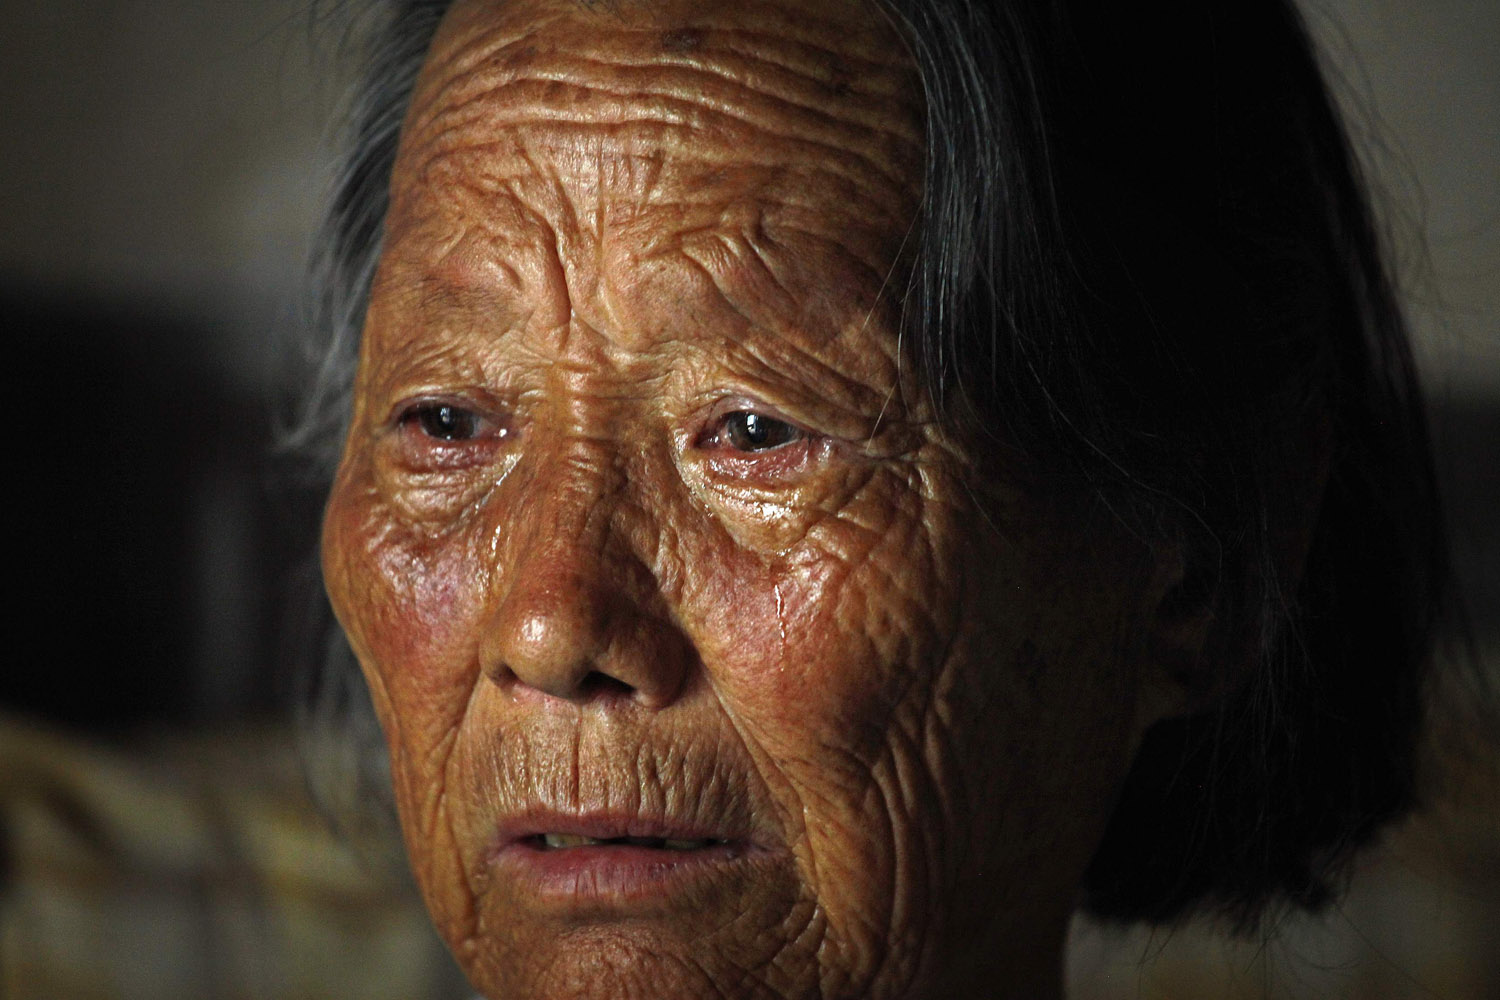 Wang Jinxiang, mother of blind Chinese activist Chen Guangcheng, at their home in the village of Dongshigu